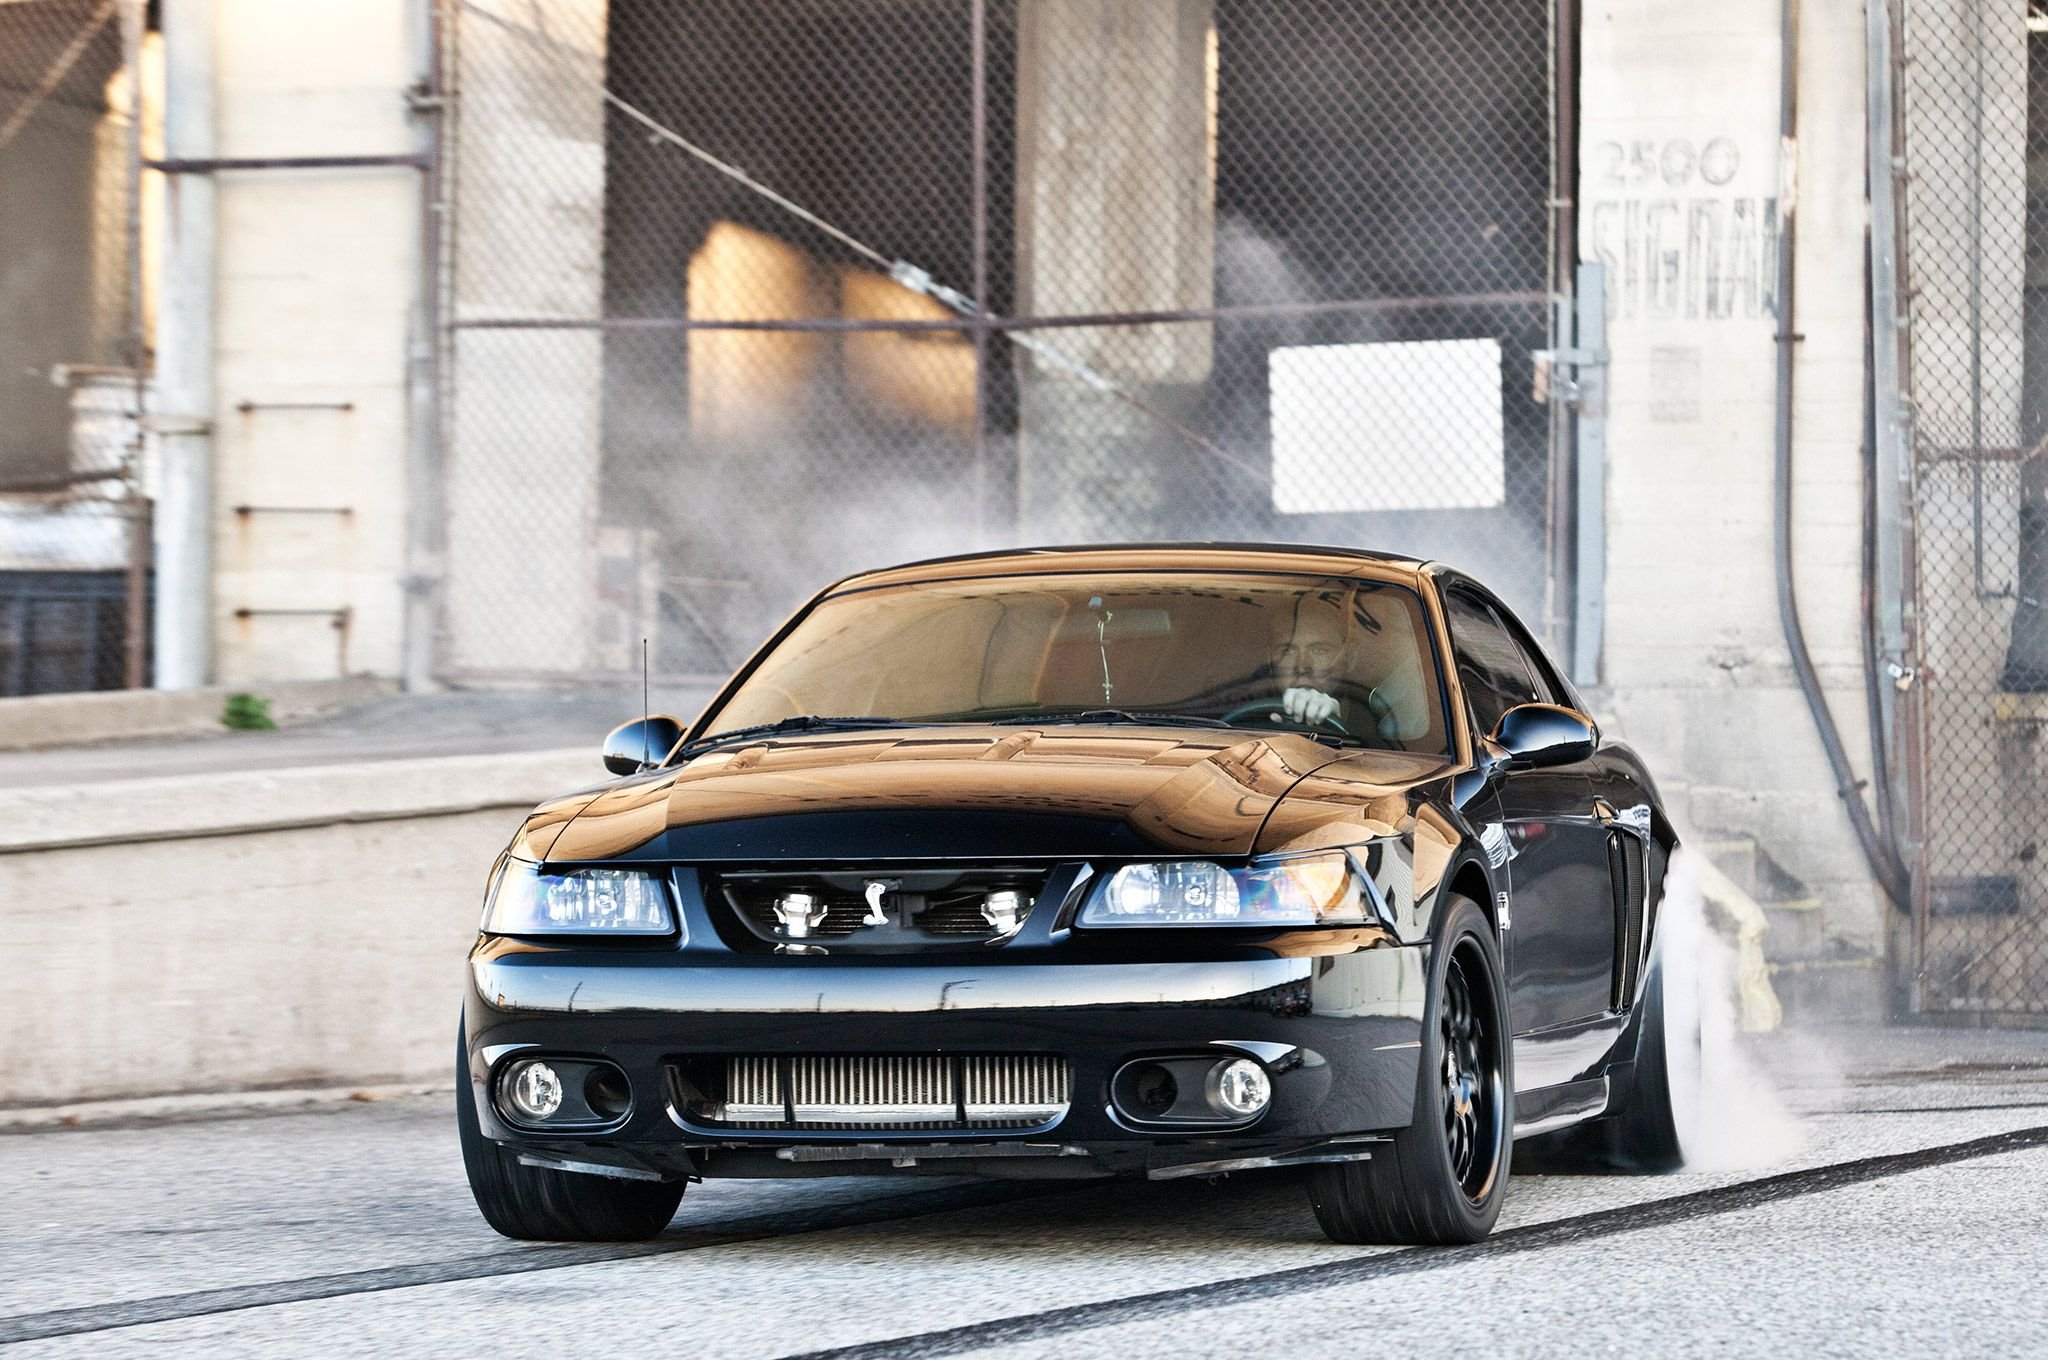 Ford Mustang Cobra Terminator Muscle Pro Touring Supercar